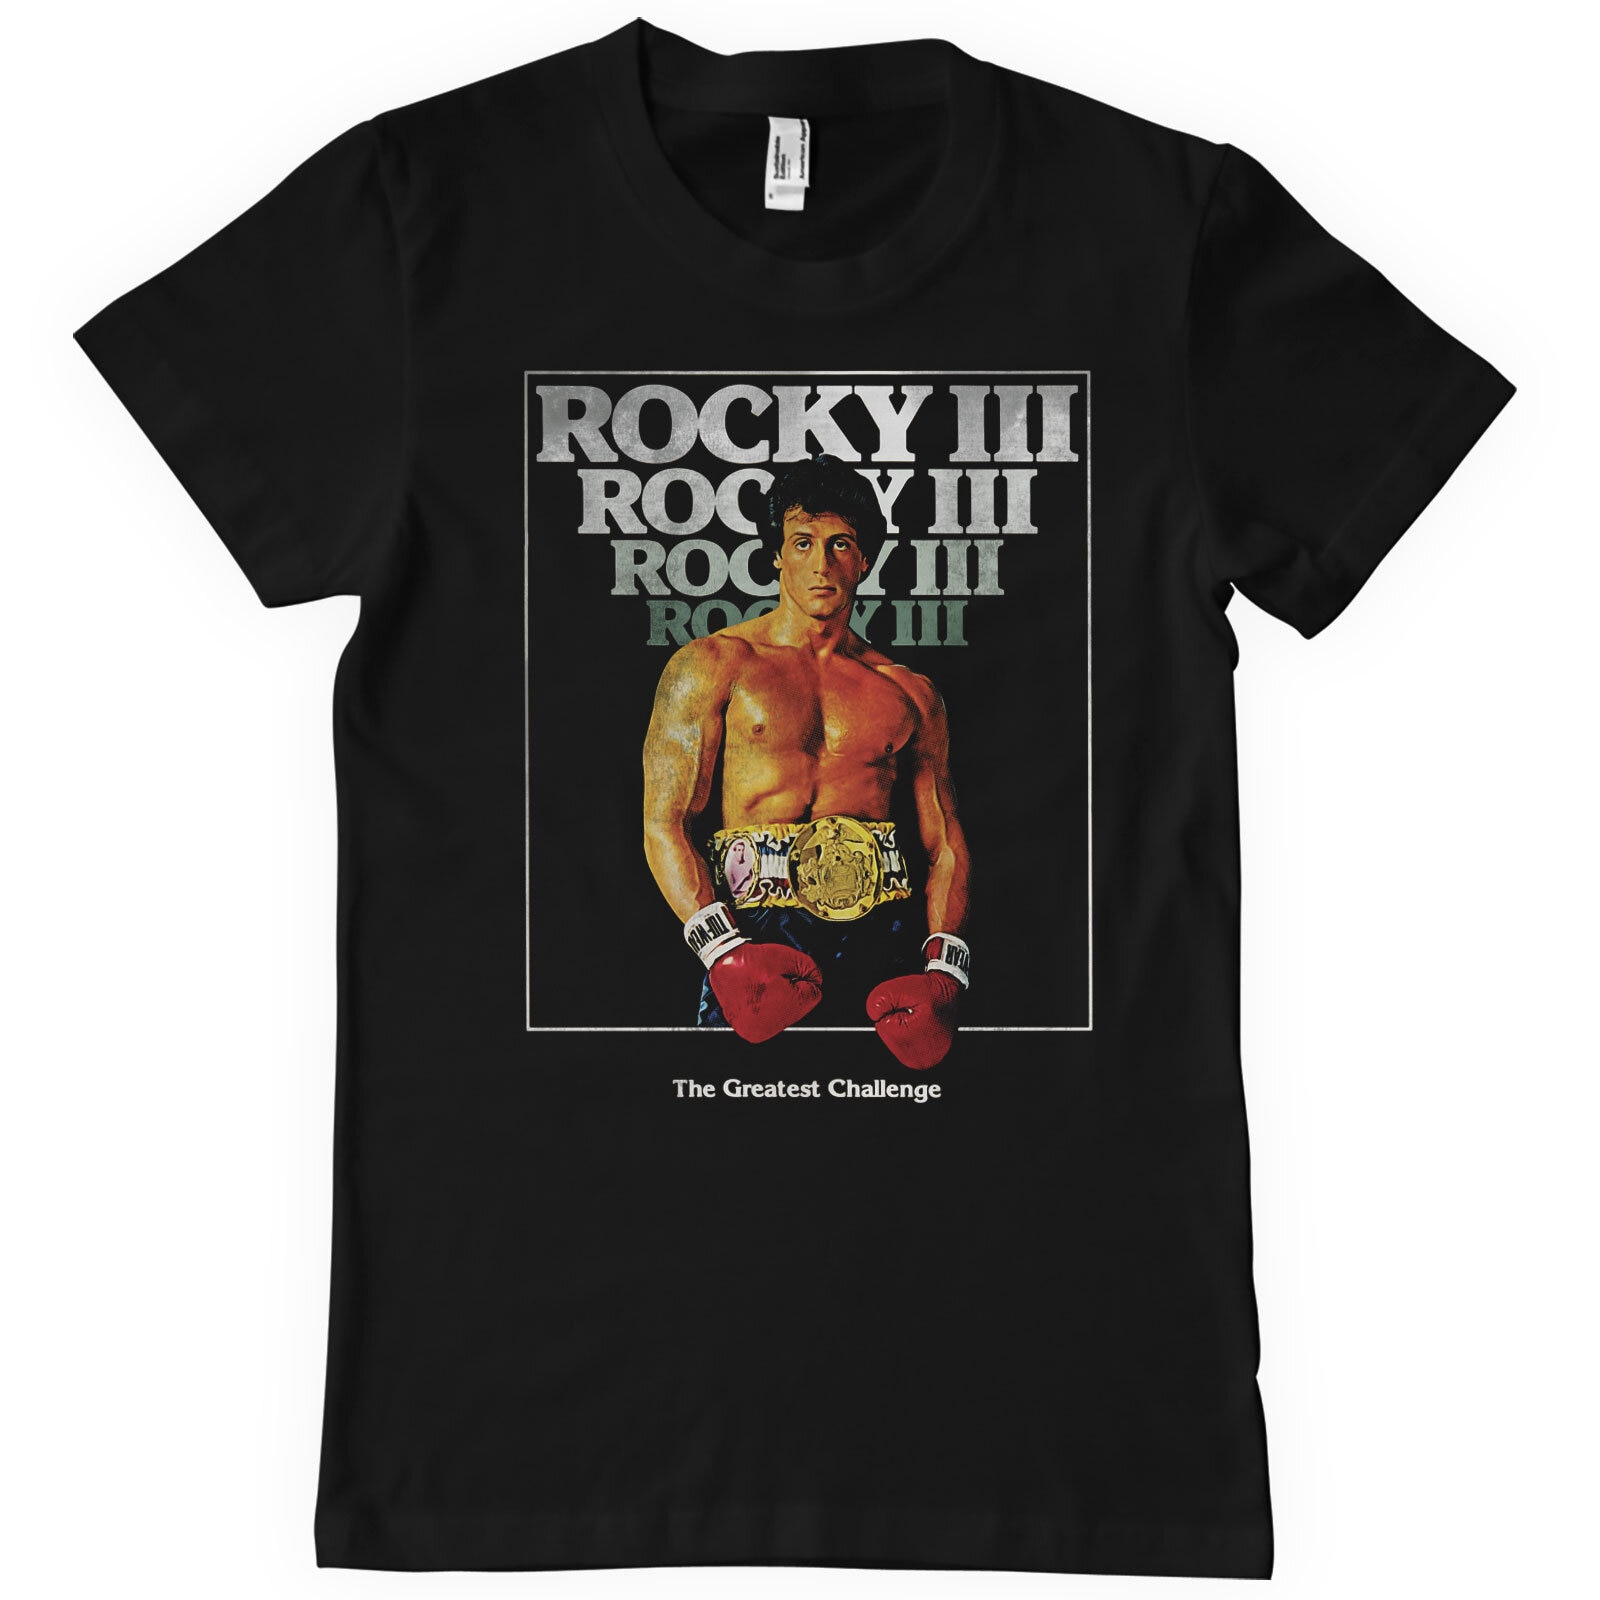 Rocky III Vintage Poster T-Shirt